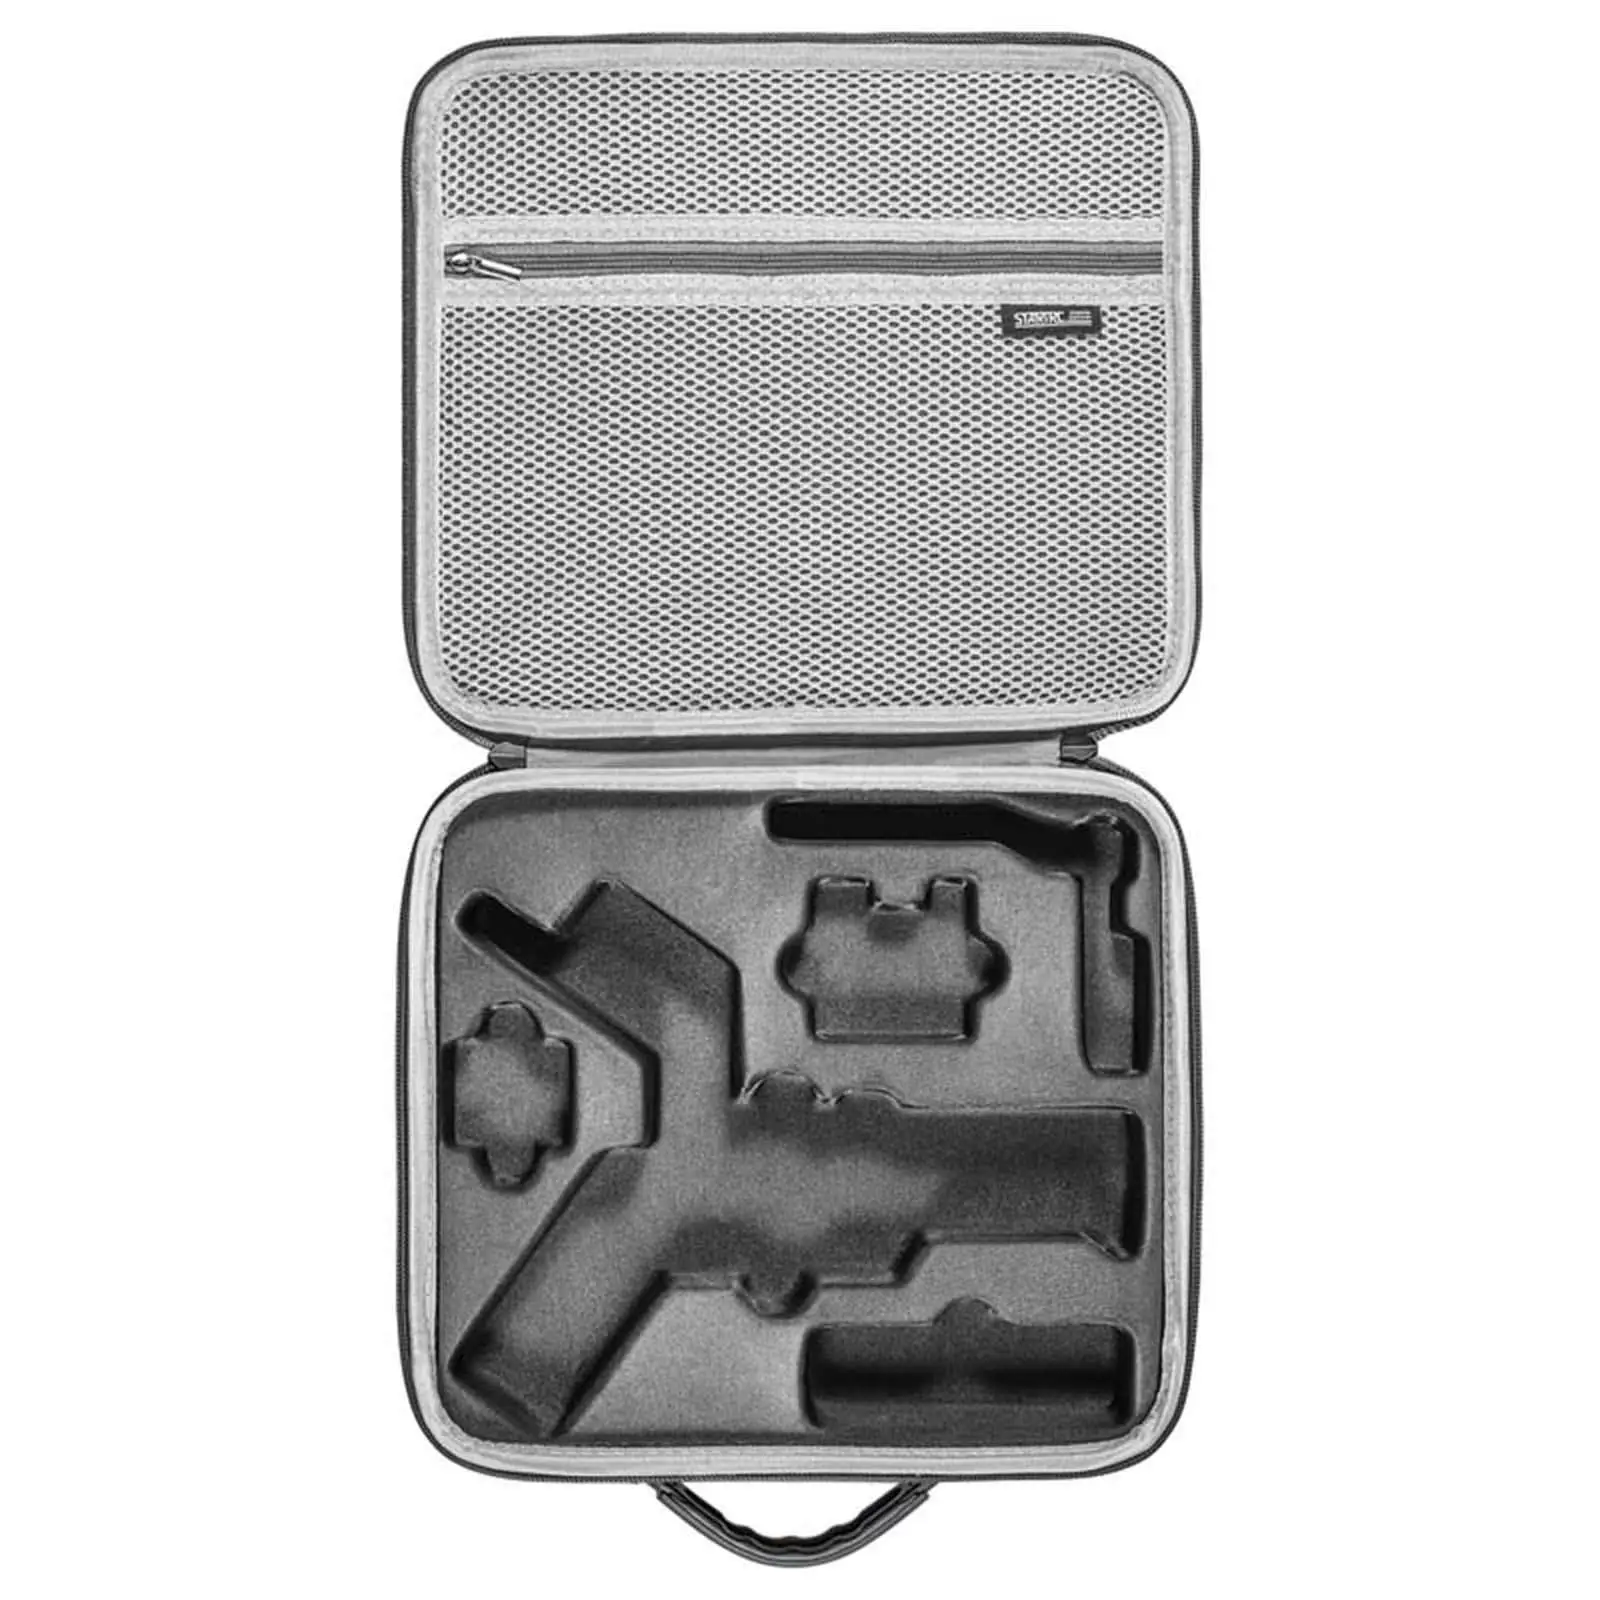 Carrying Case for Ronin RS 3 Mini Portable Adjustable Strap Travel Waterproof Handheld Camera Stabilizer Storage Bag